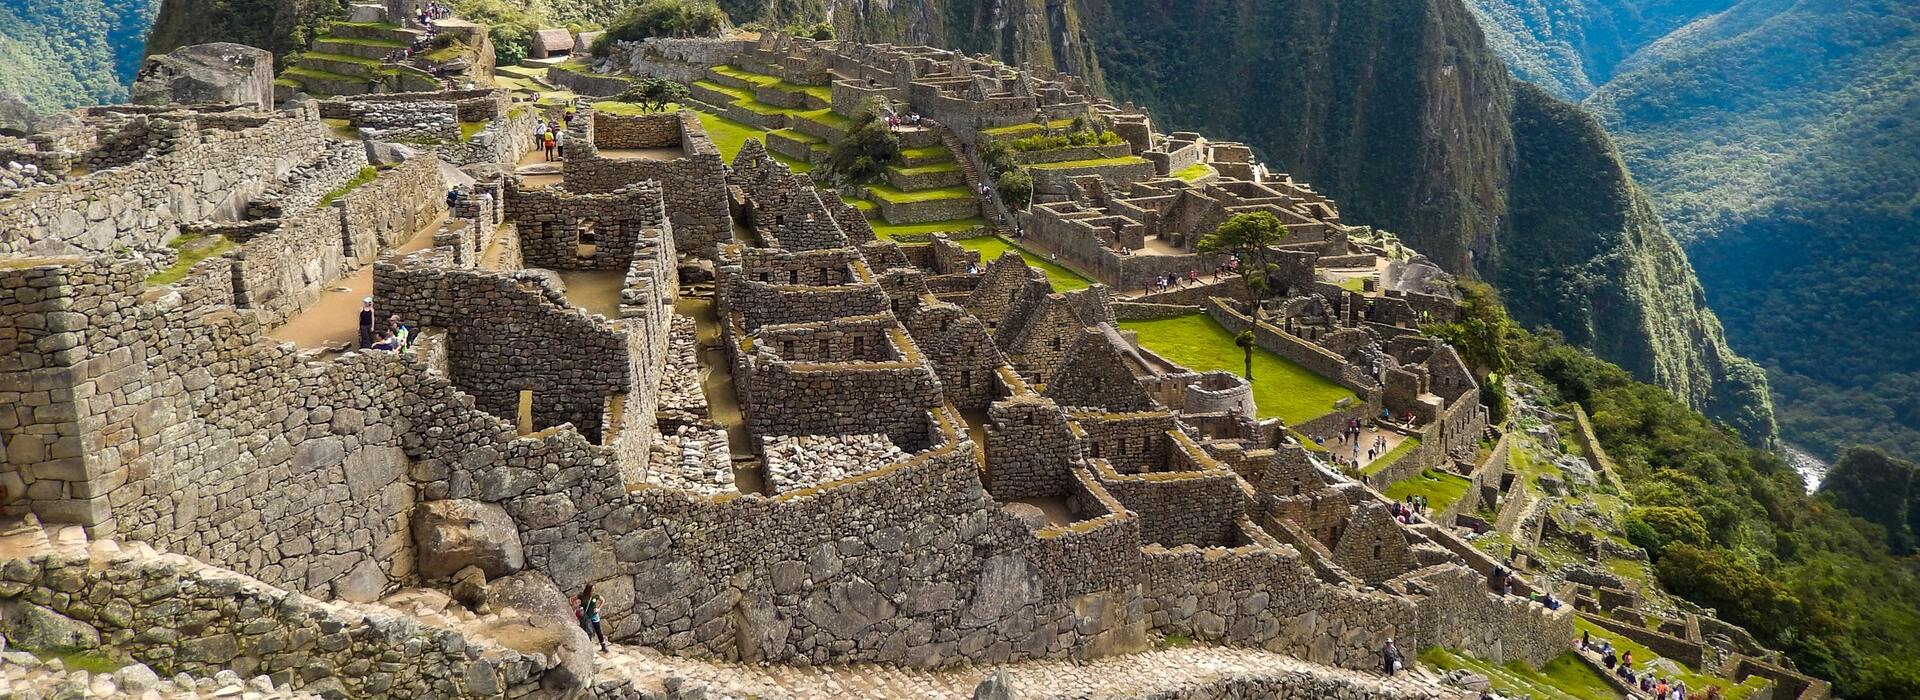 Peru Tours and Holiday Packages